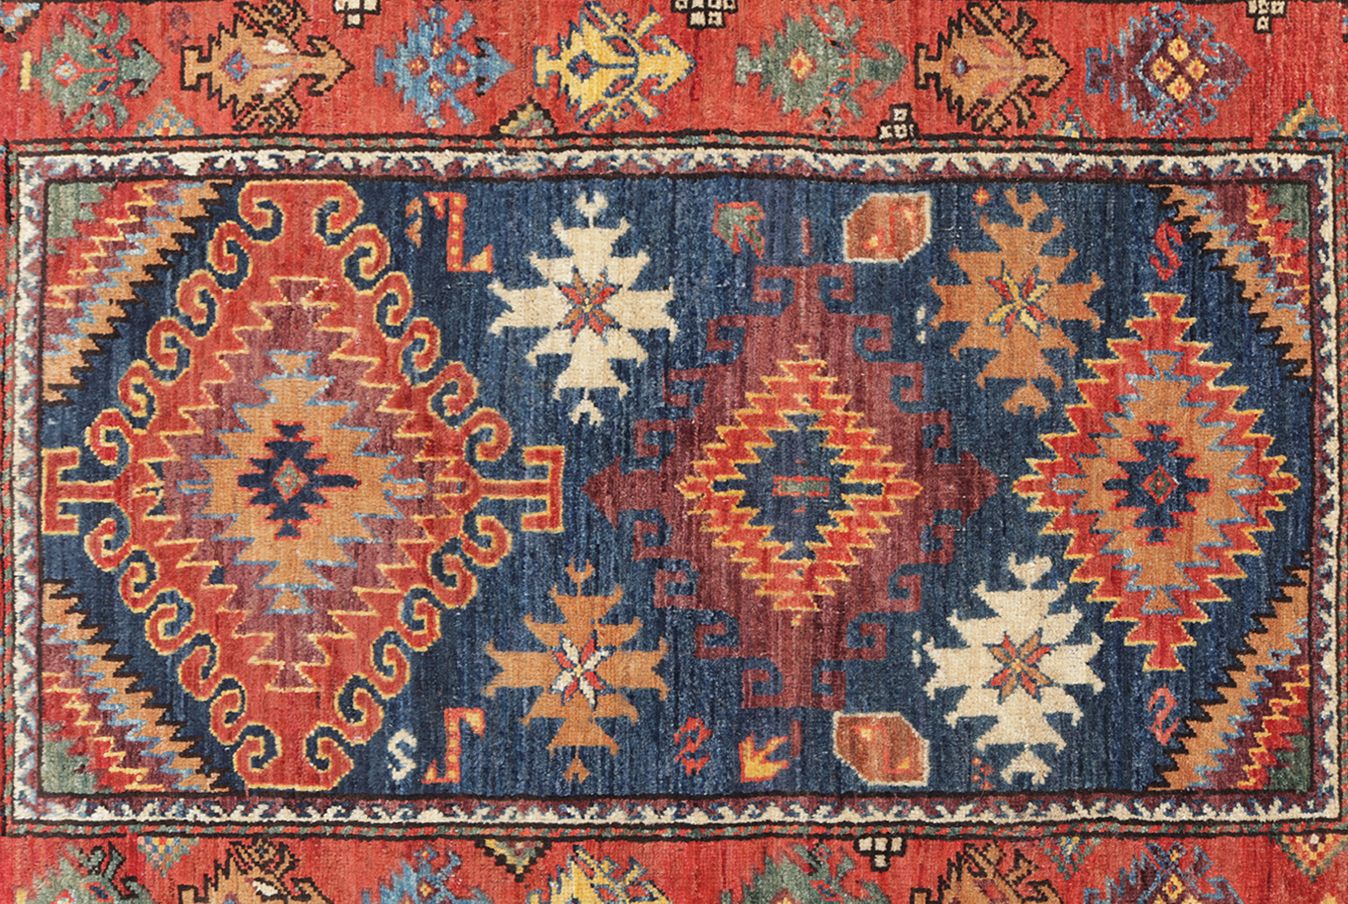 A Guide To Traditional Hand Knotted Rugs | Blog Intended For Hand Knotted Rugs (View 11 of 15)